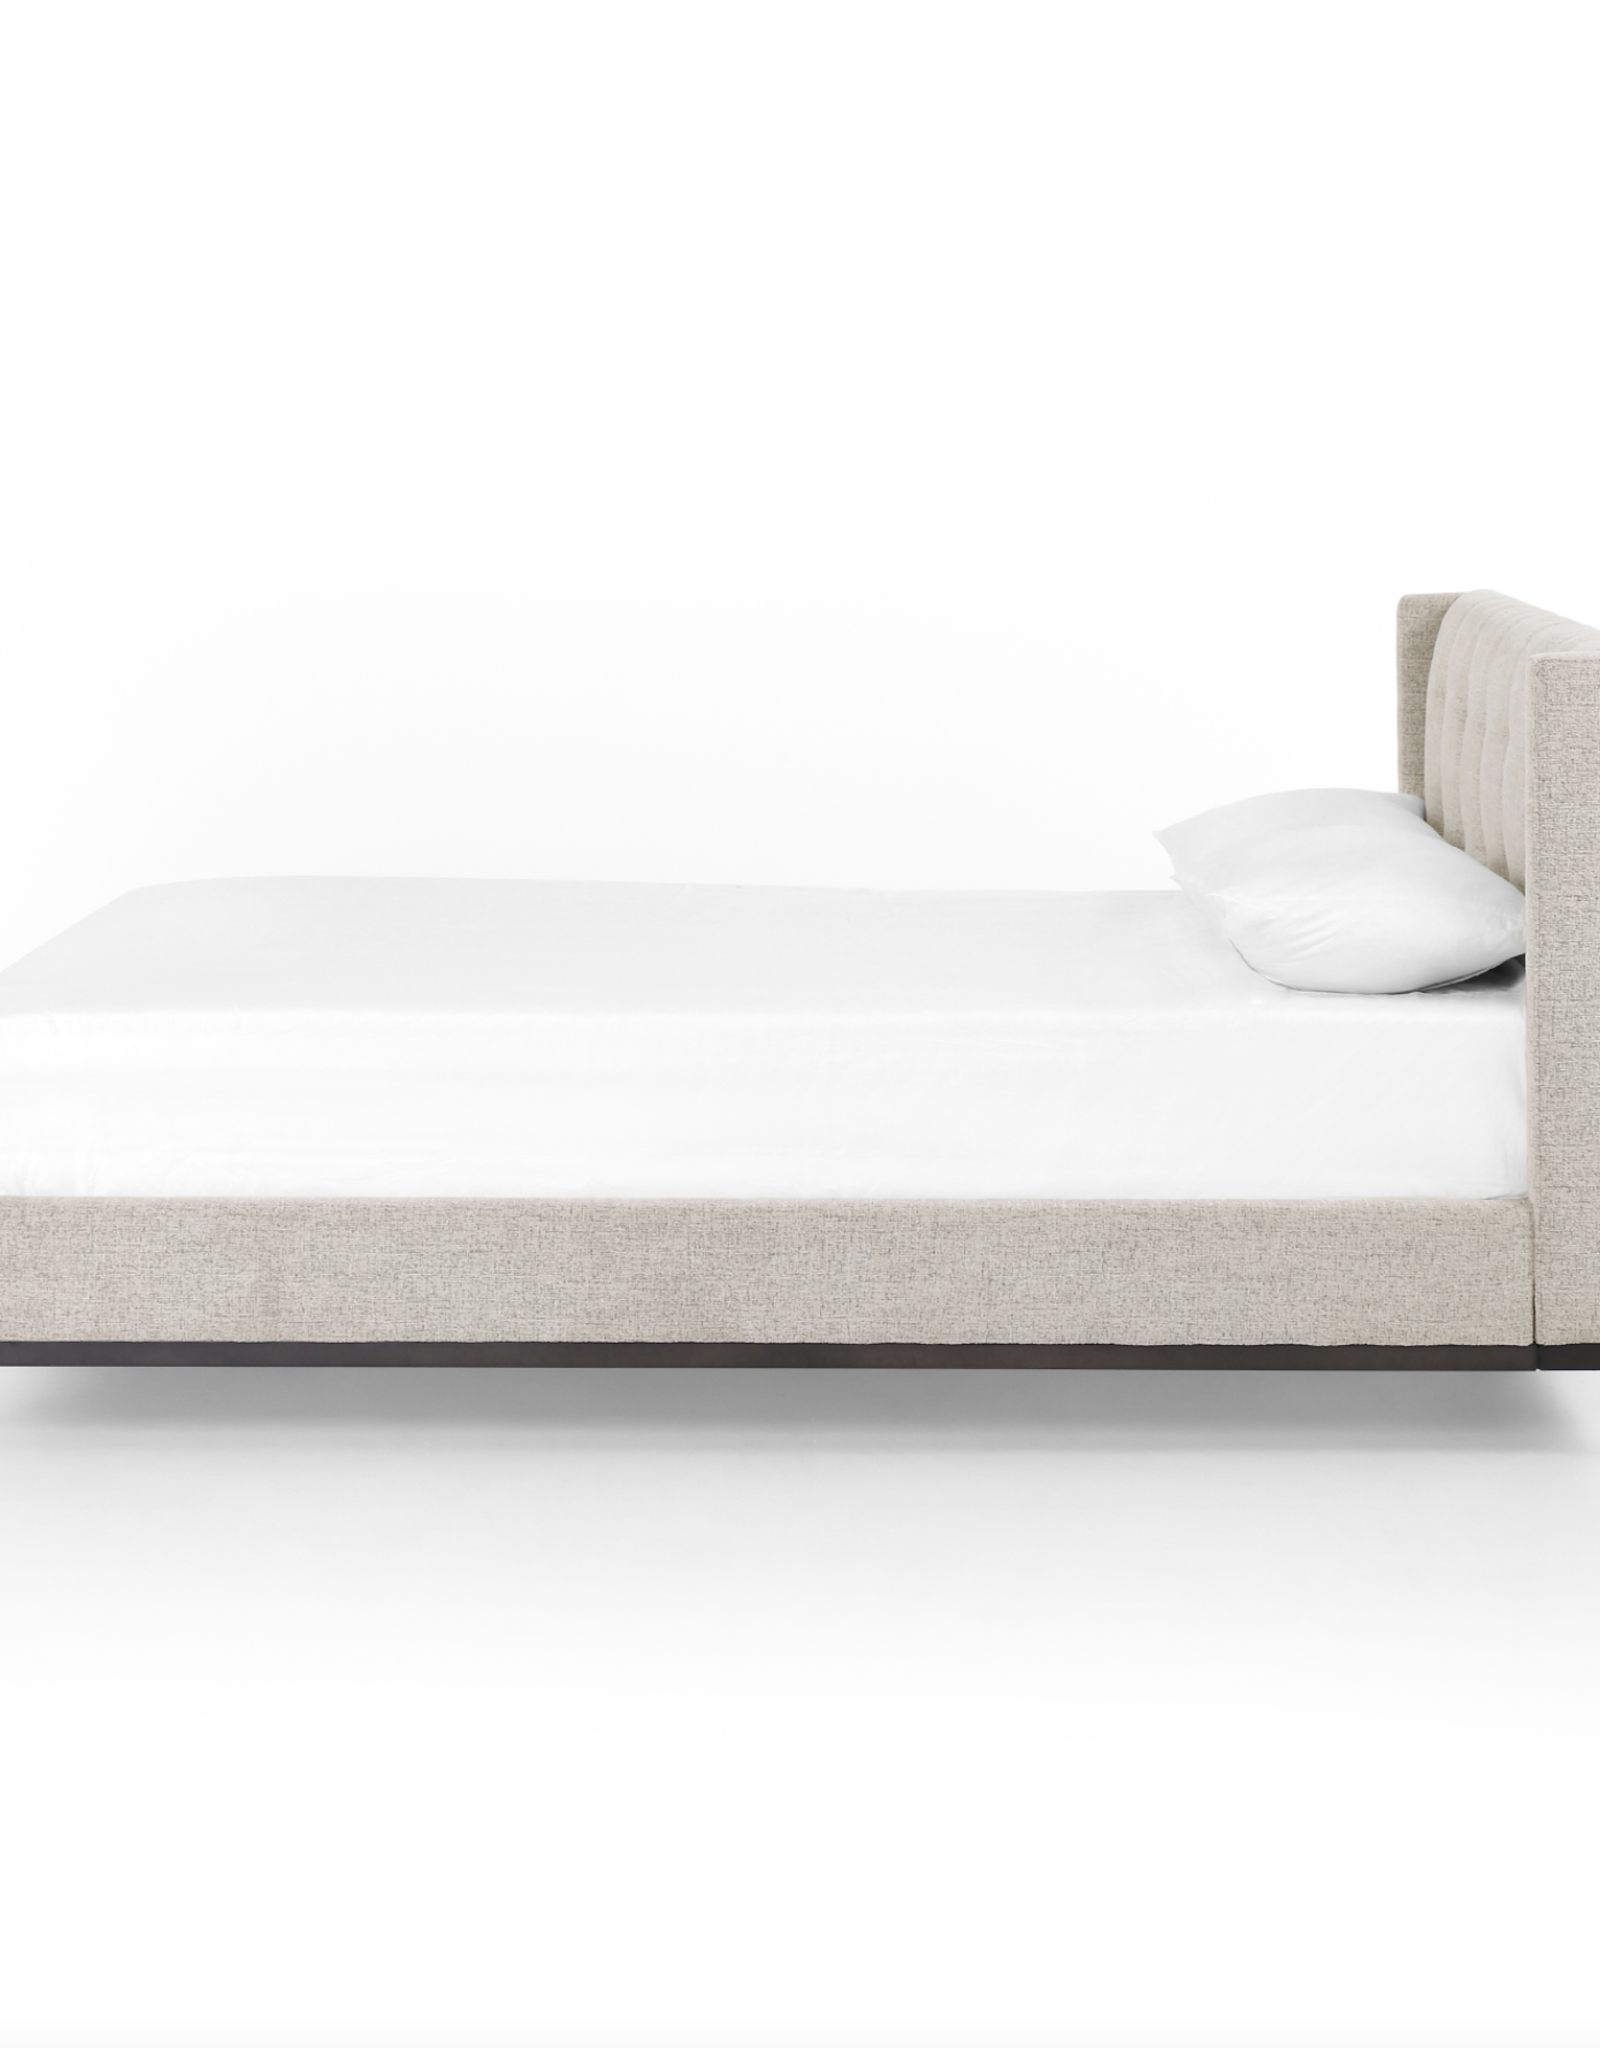 Newhall Bed in Plushtone Linen - Queen